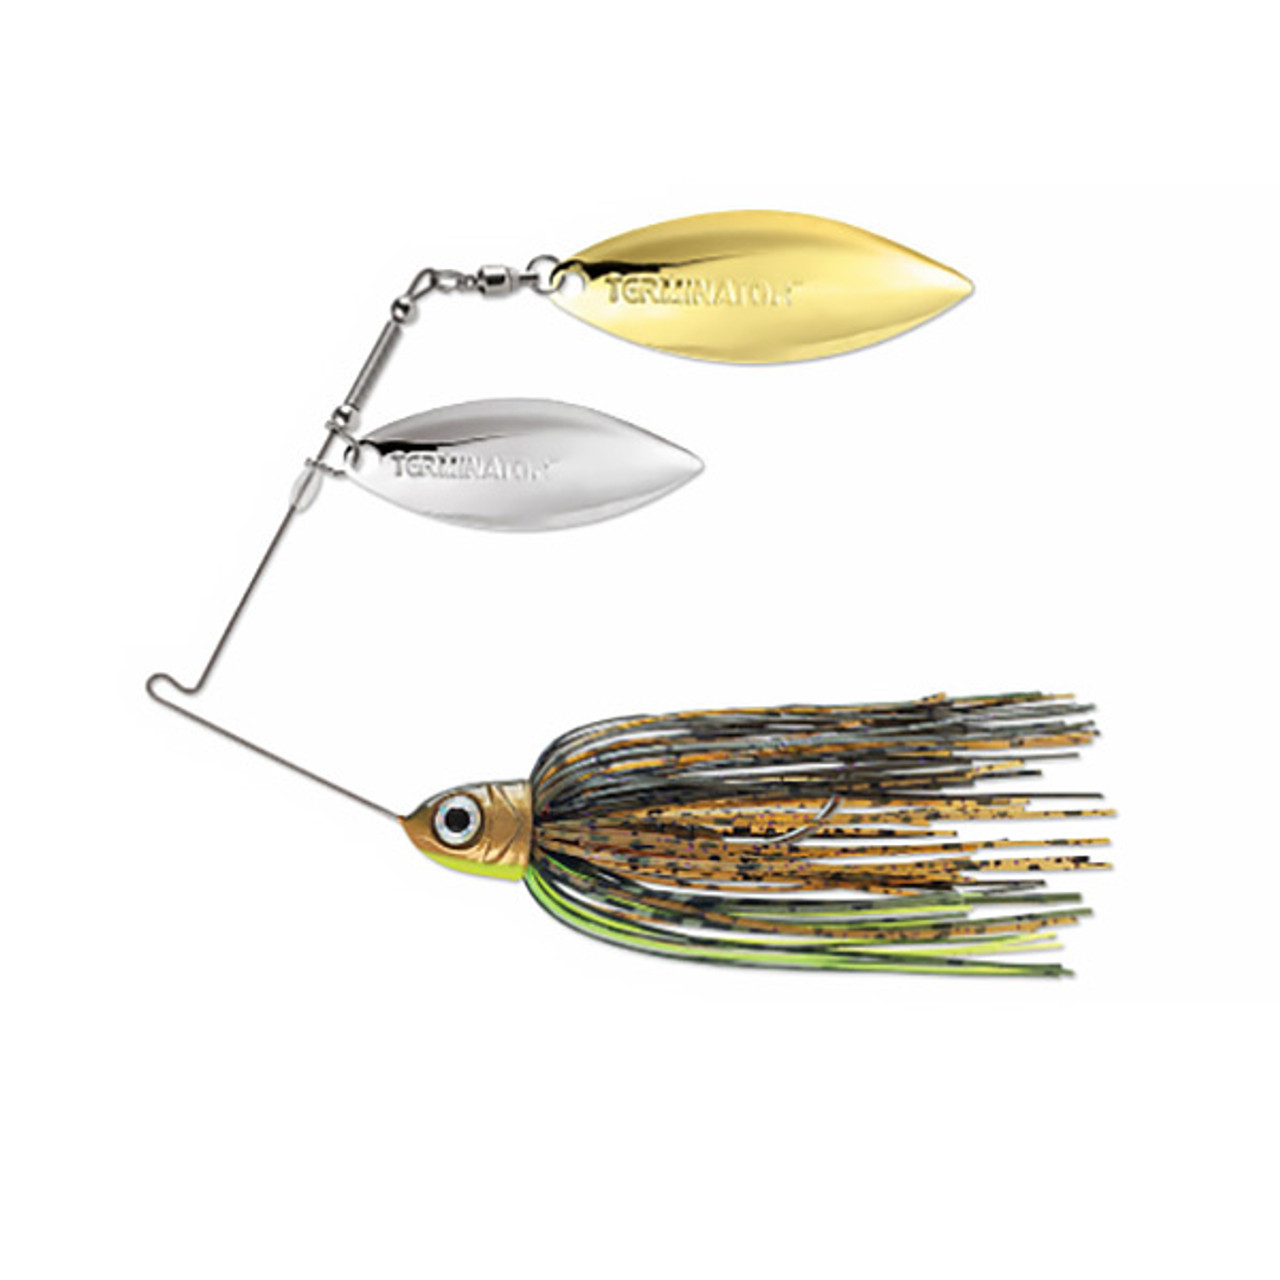 Pro Series Double Willow 1/2 oz Spinnerbaits by Terminator